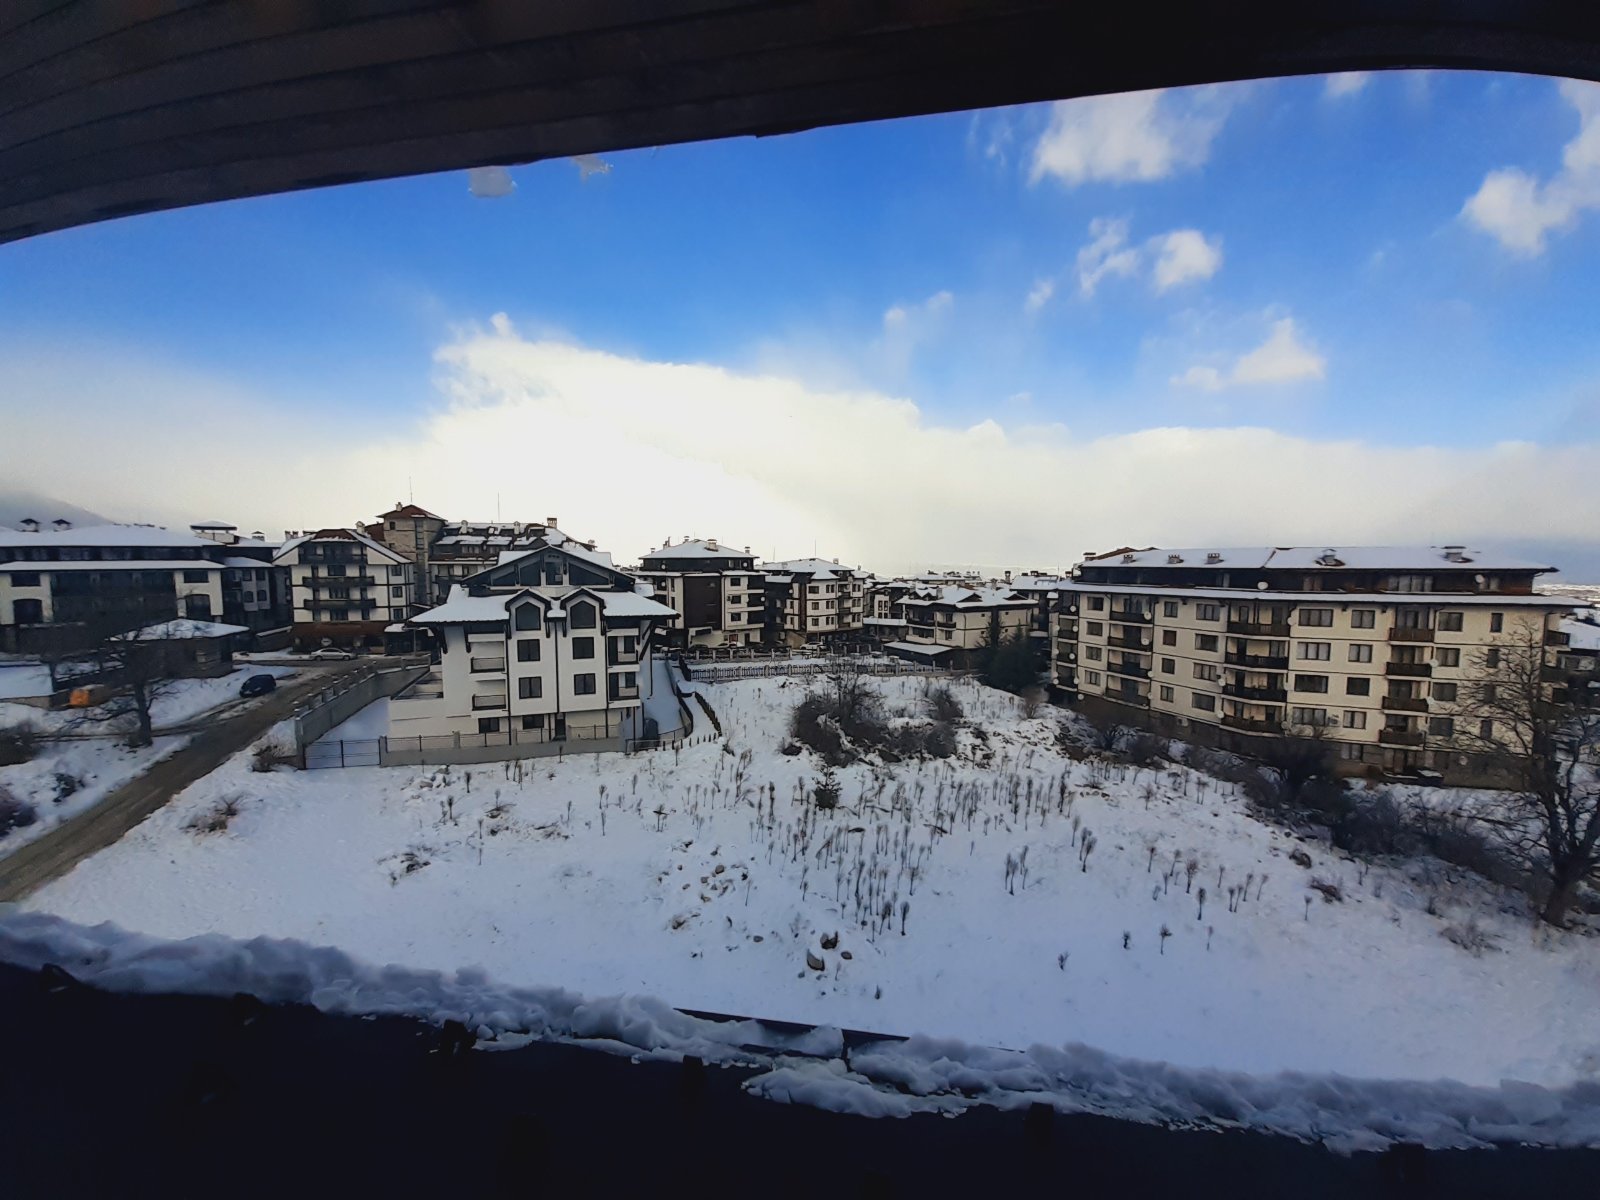 Holiday one-bedroom apartment for sale in Bansko